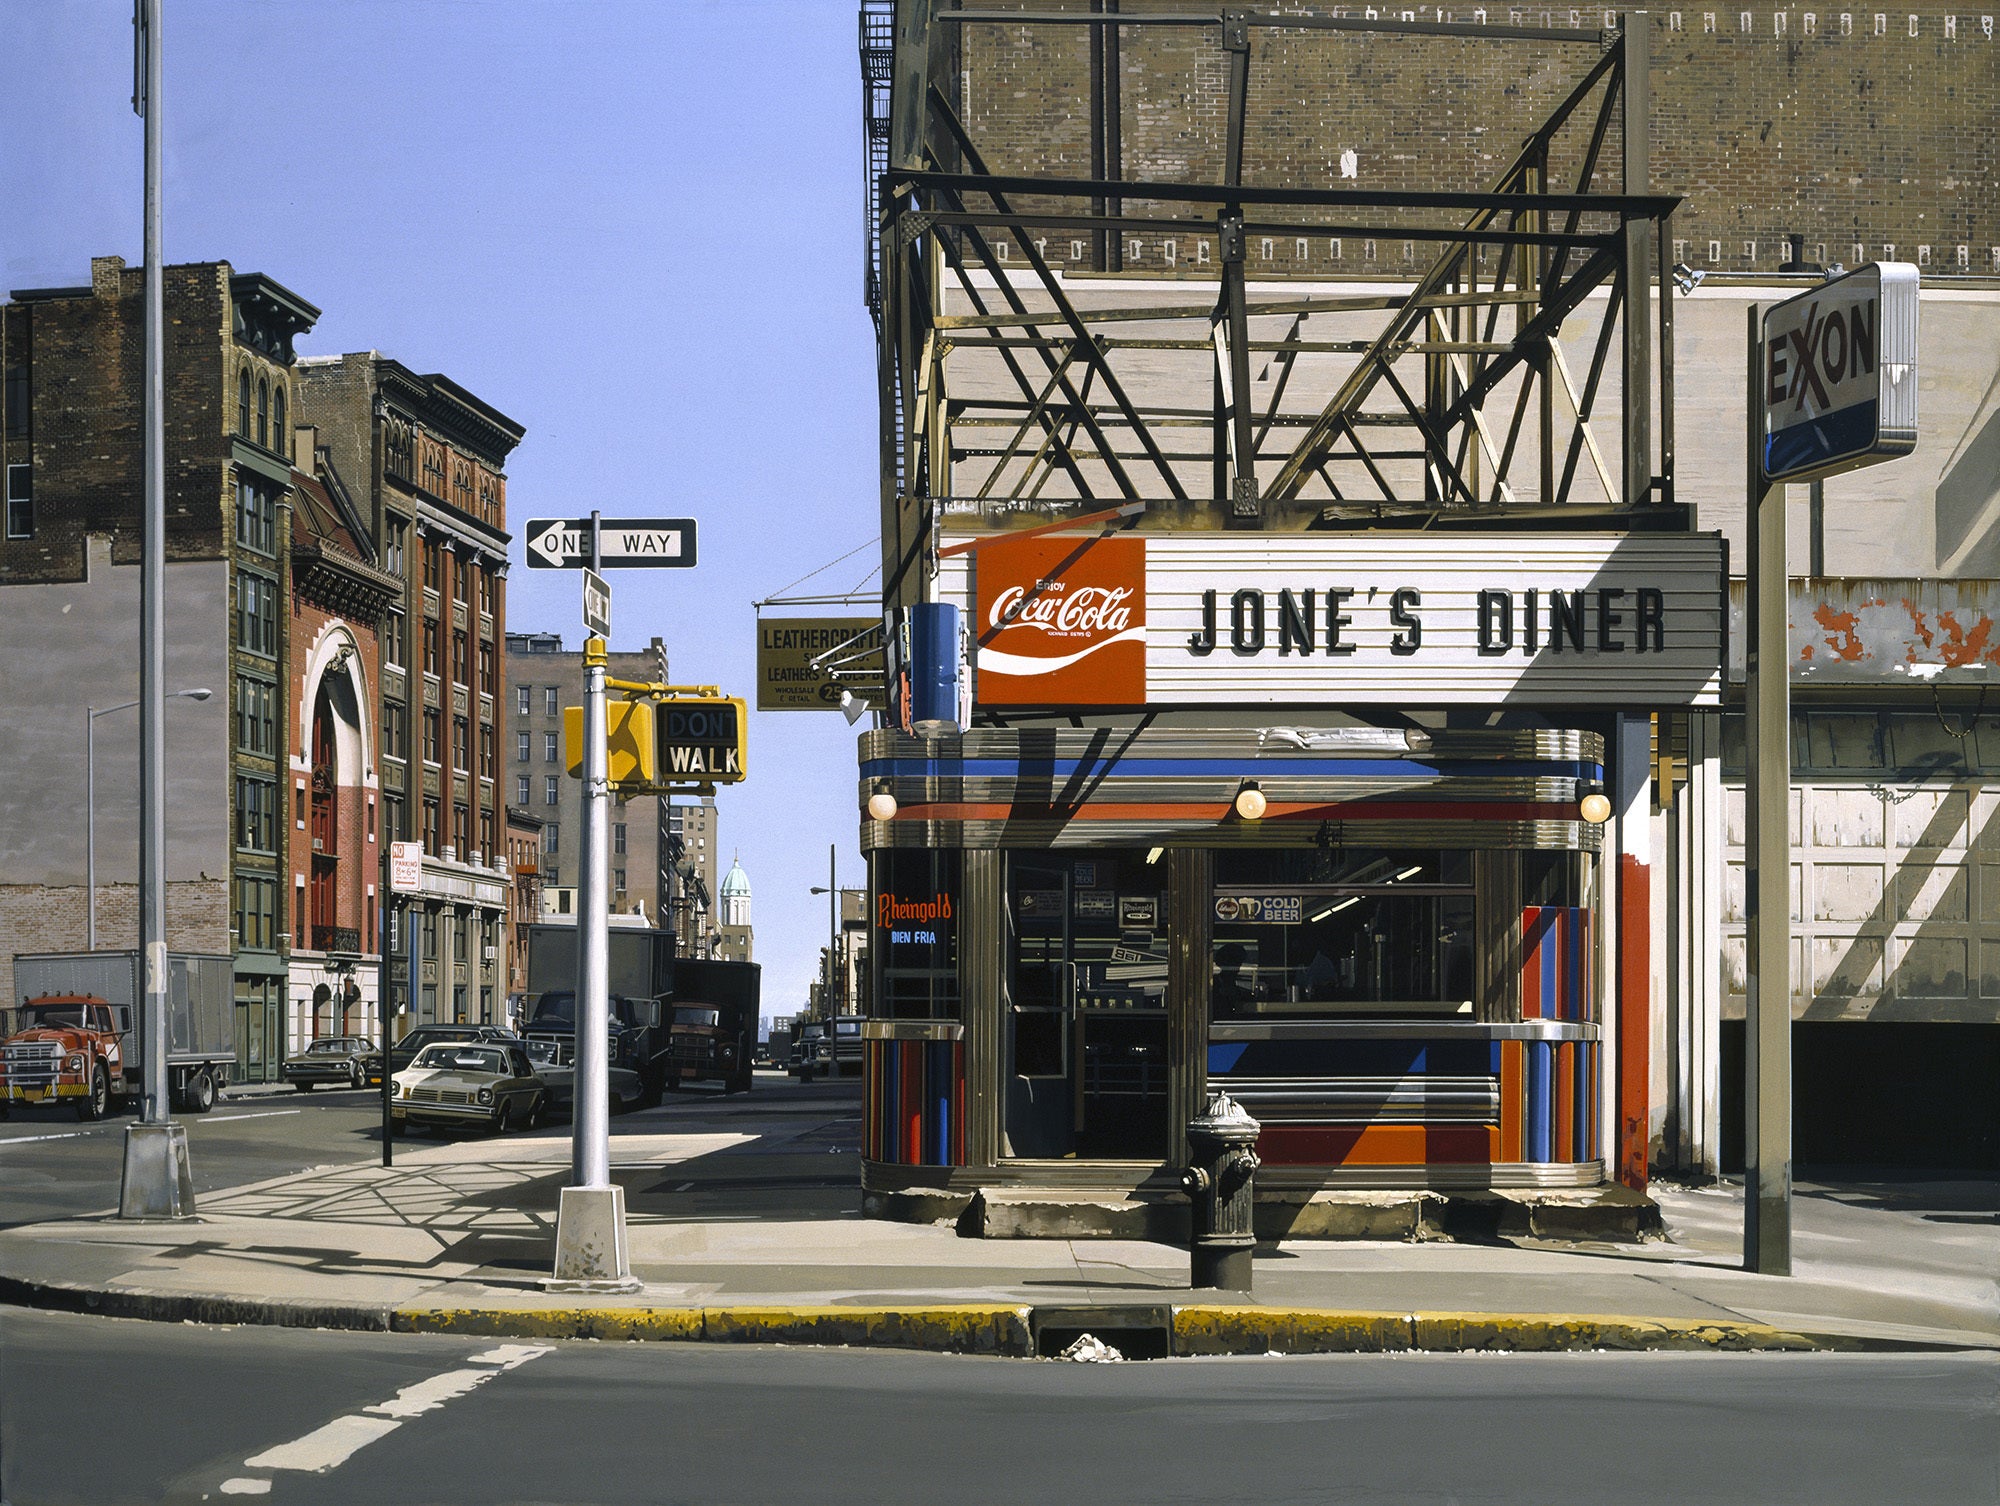 Understanding the photorealism movement and its pioneers